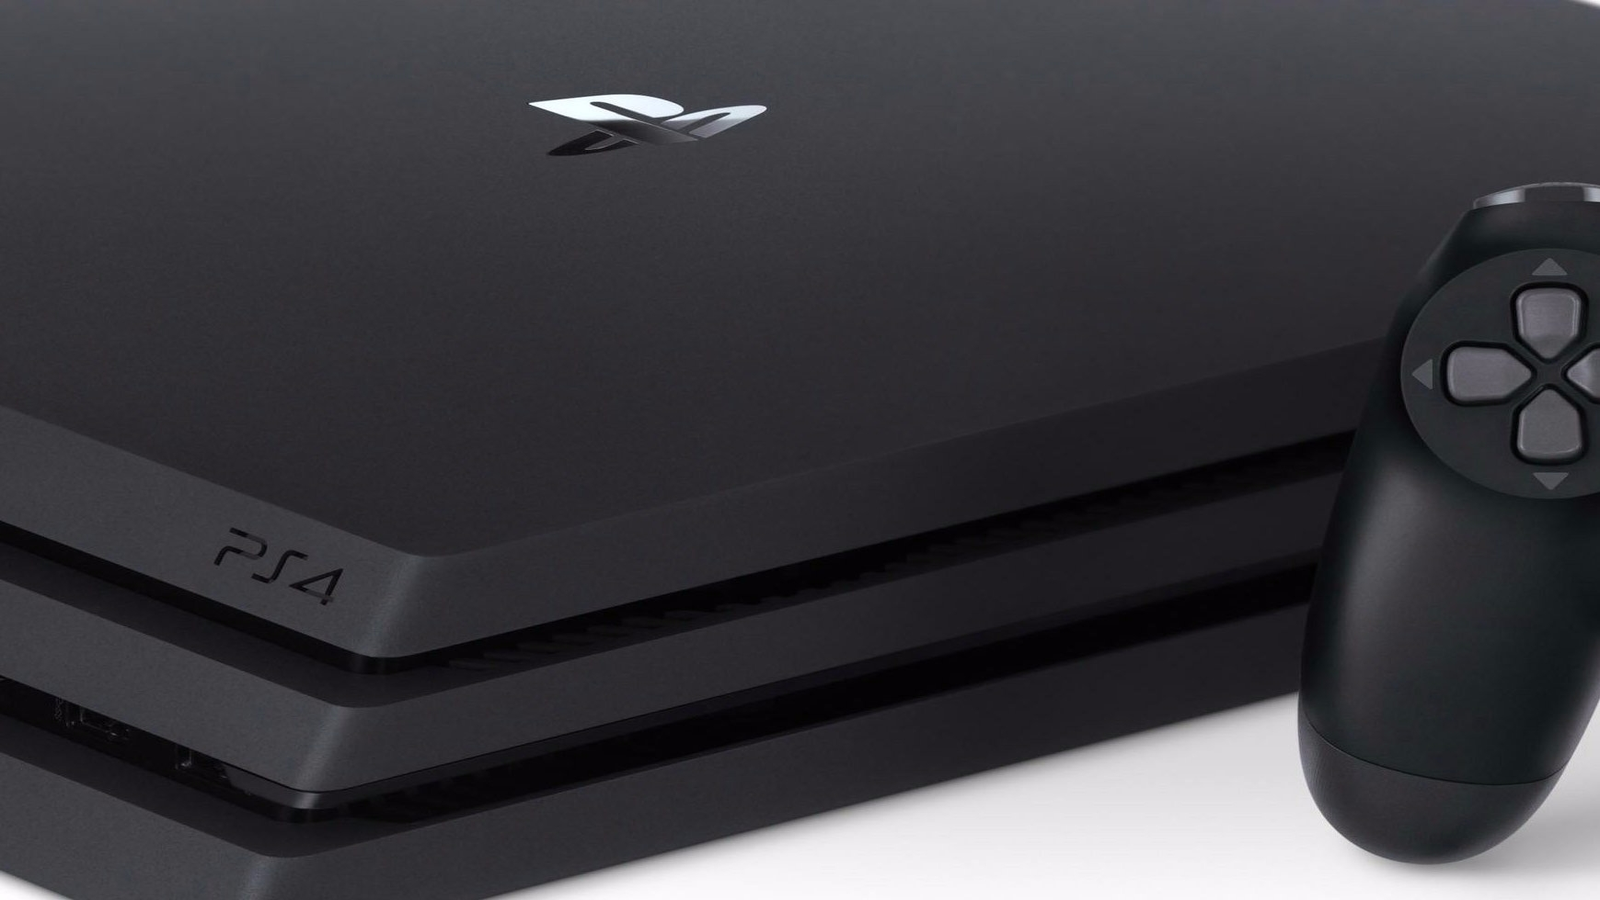 Sony confirms there's life in the PS4 yet